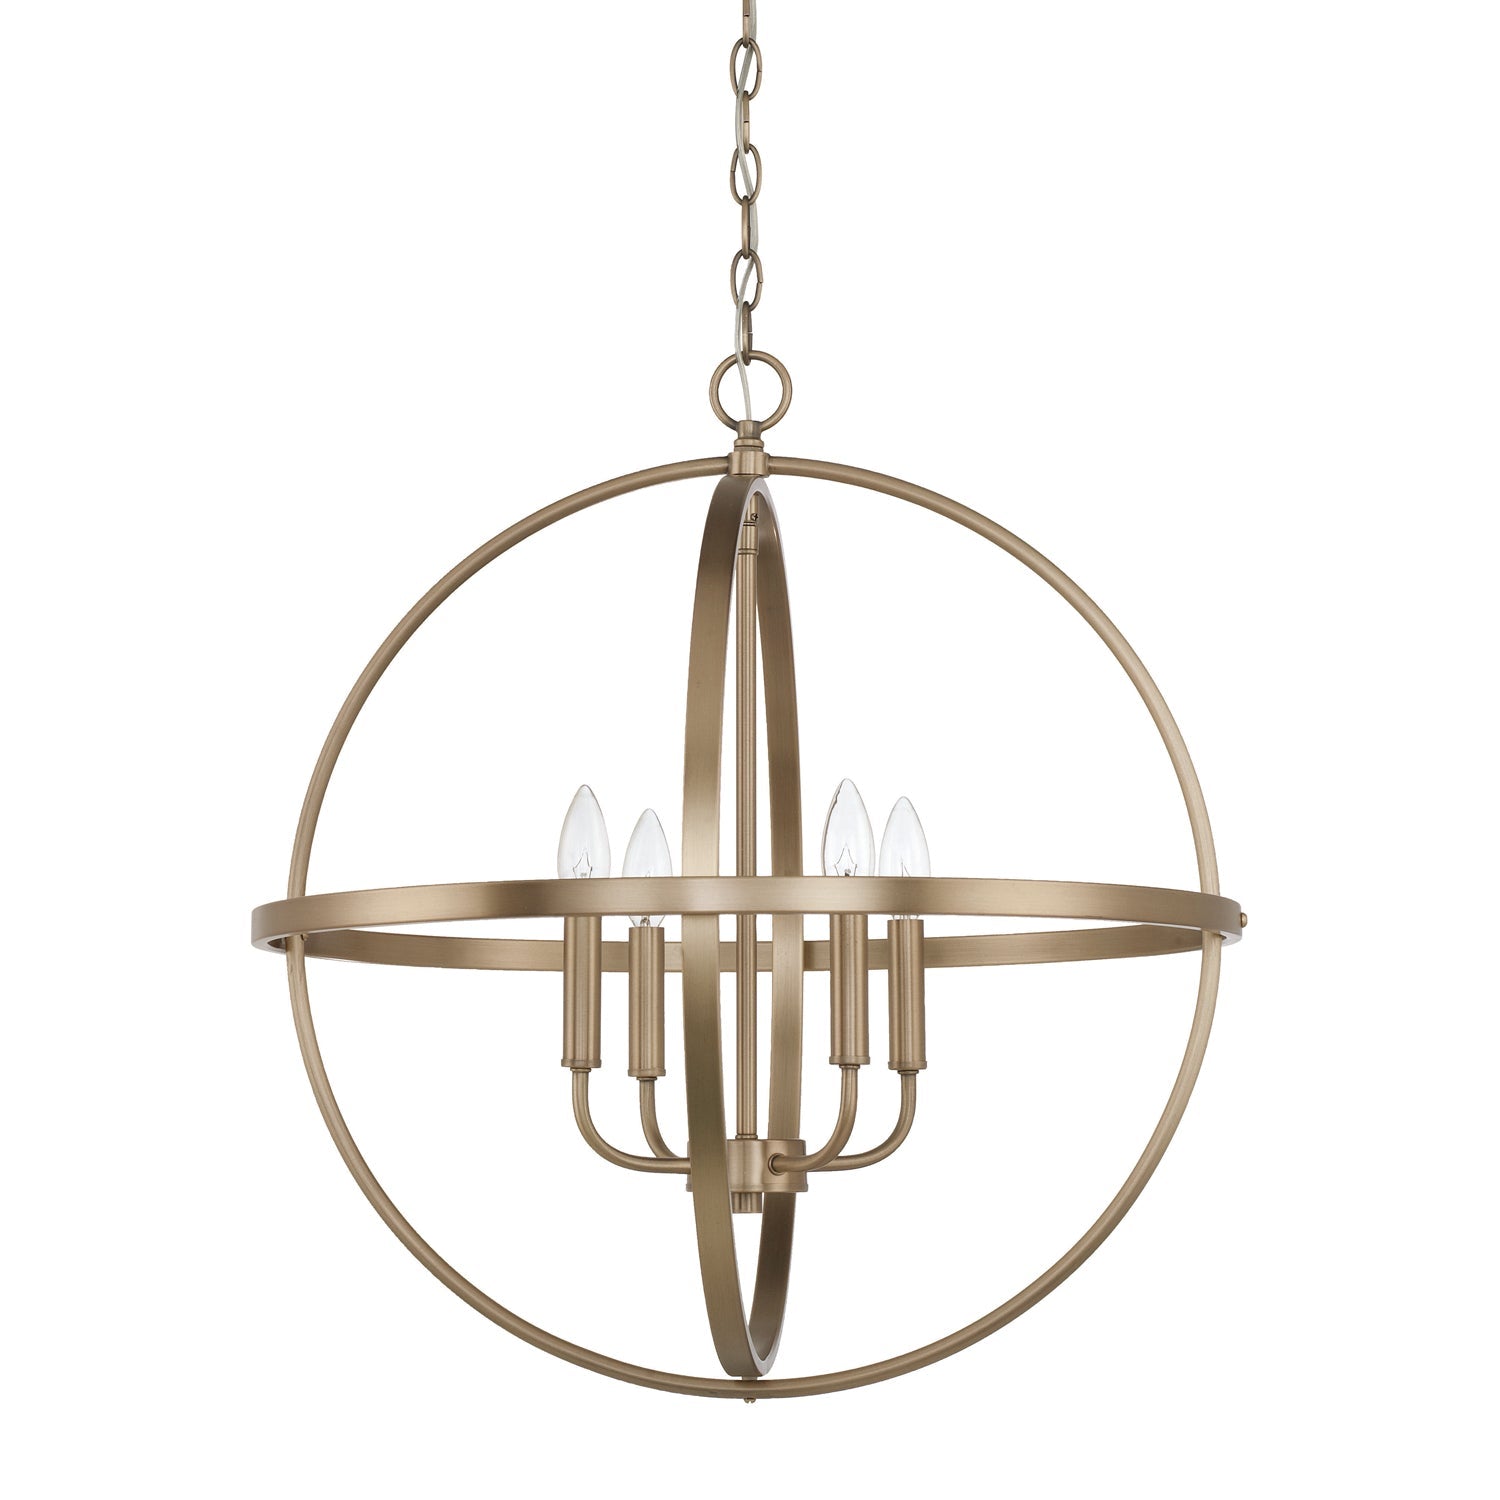 Capital Hartwell 317542AD Chandelier Light - Aged Brass